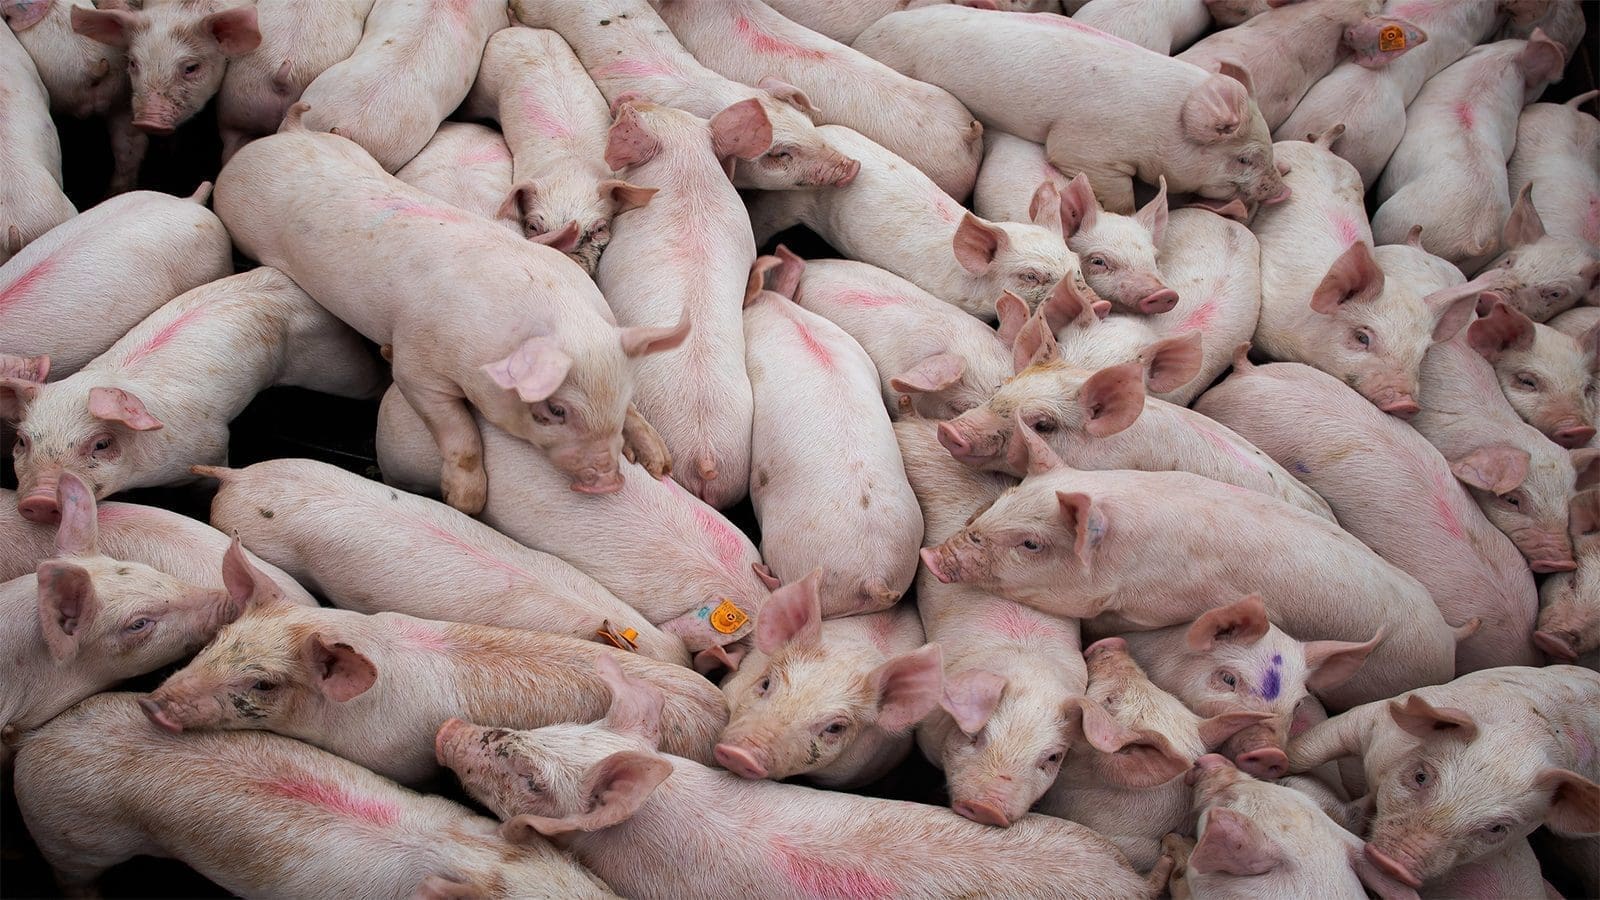 USDA initiates awareness campaign to prevent spread of African swine fever